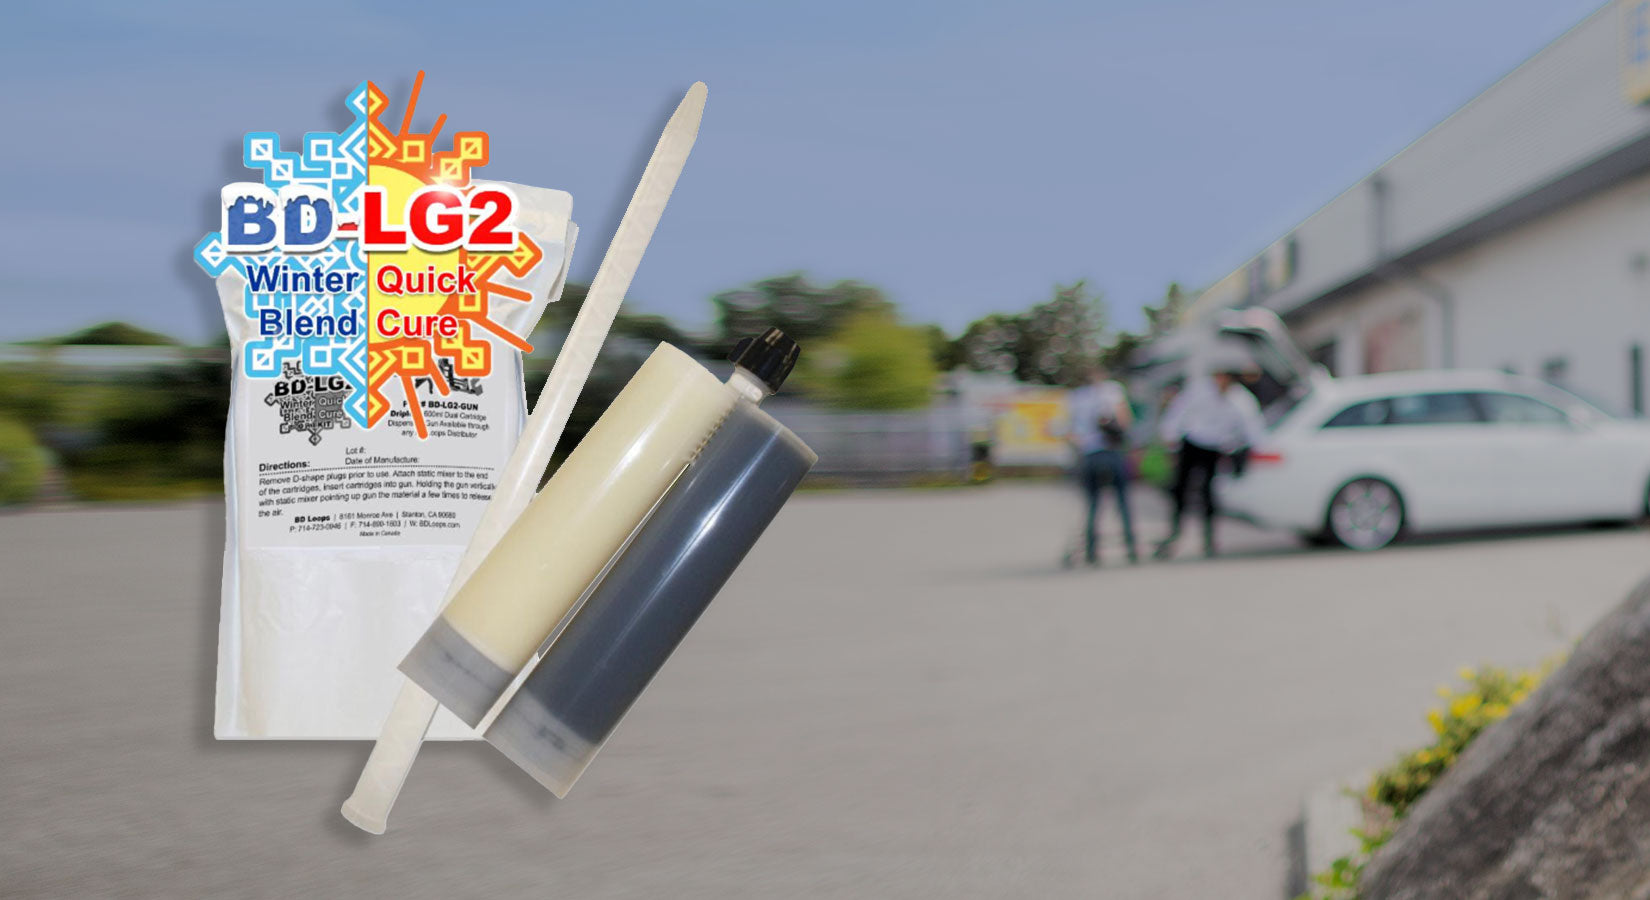 The Versatility of BD Loops BD-LG2 Loop Sealant | All Security Equipment